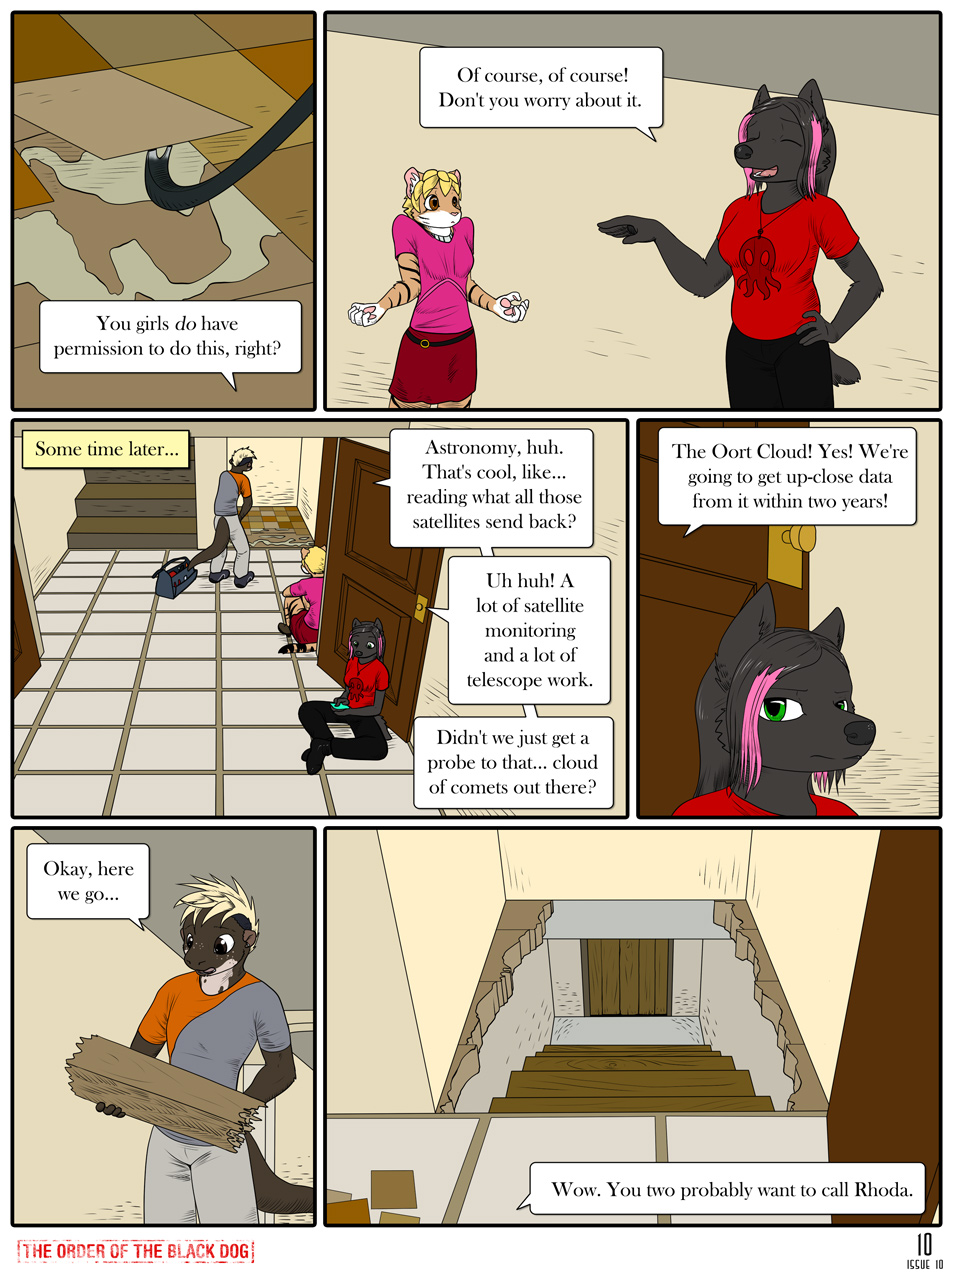 Issue 10, Page 10